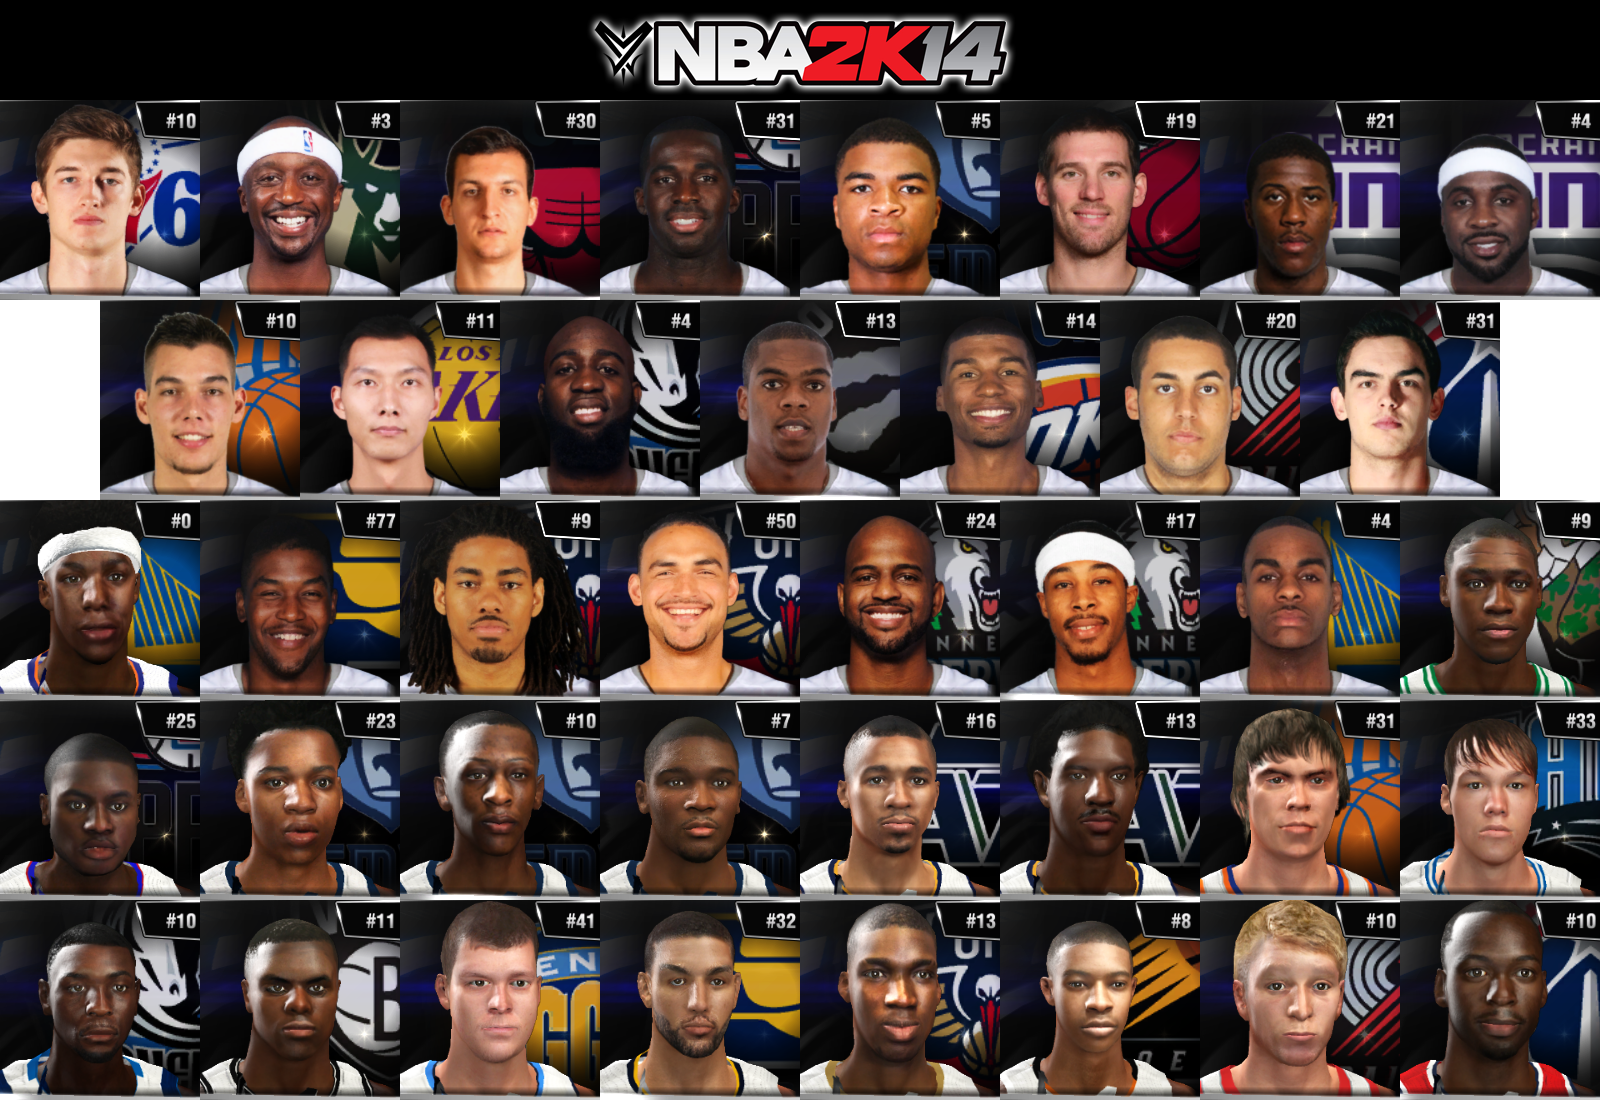 tramadol classification updated nba rosters